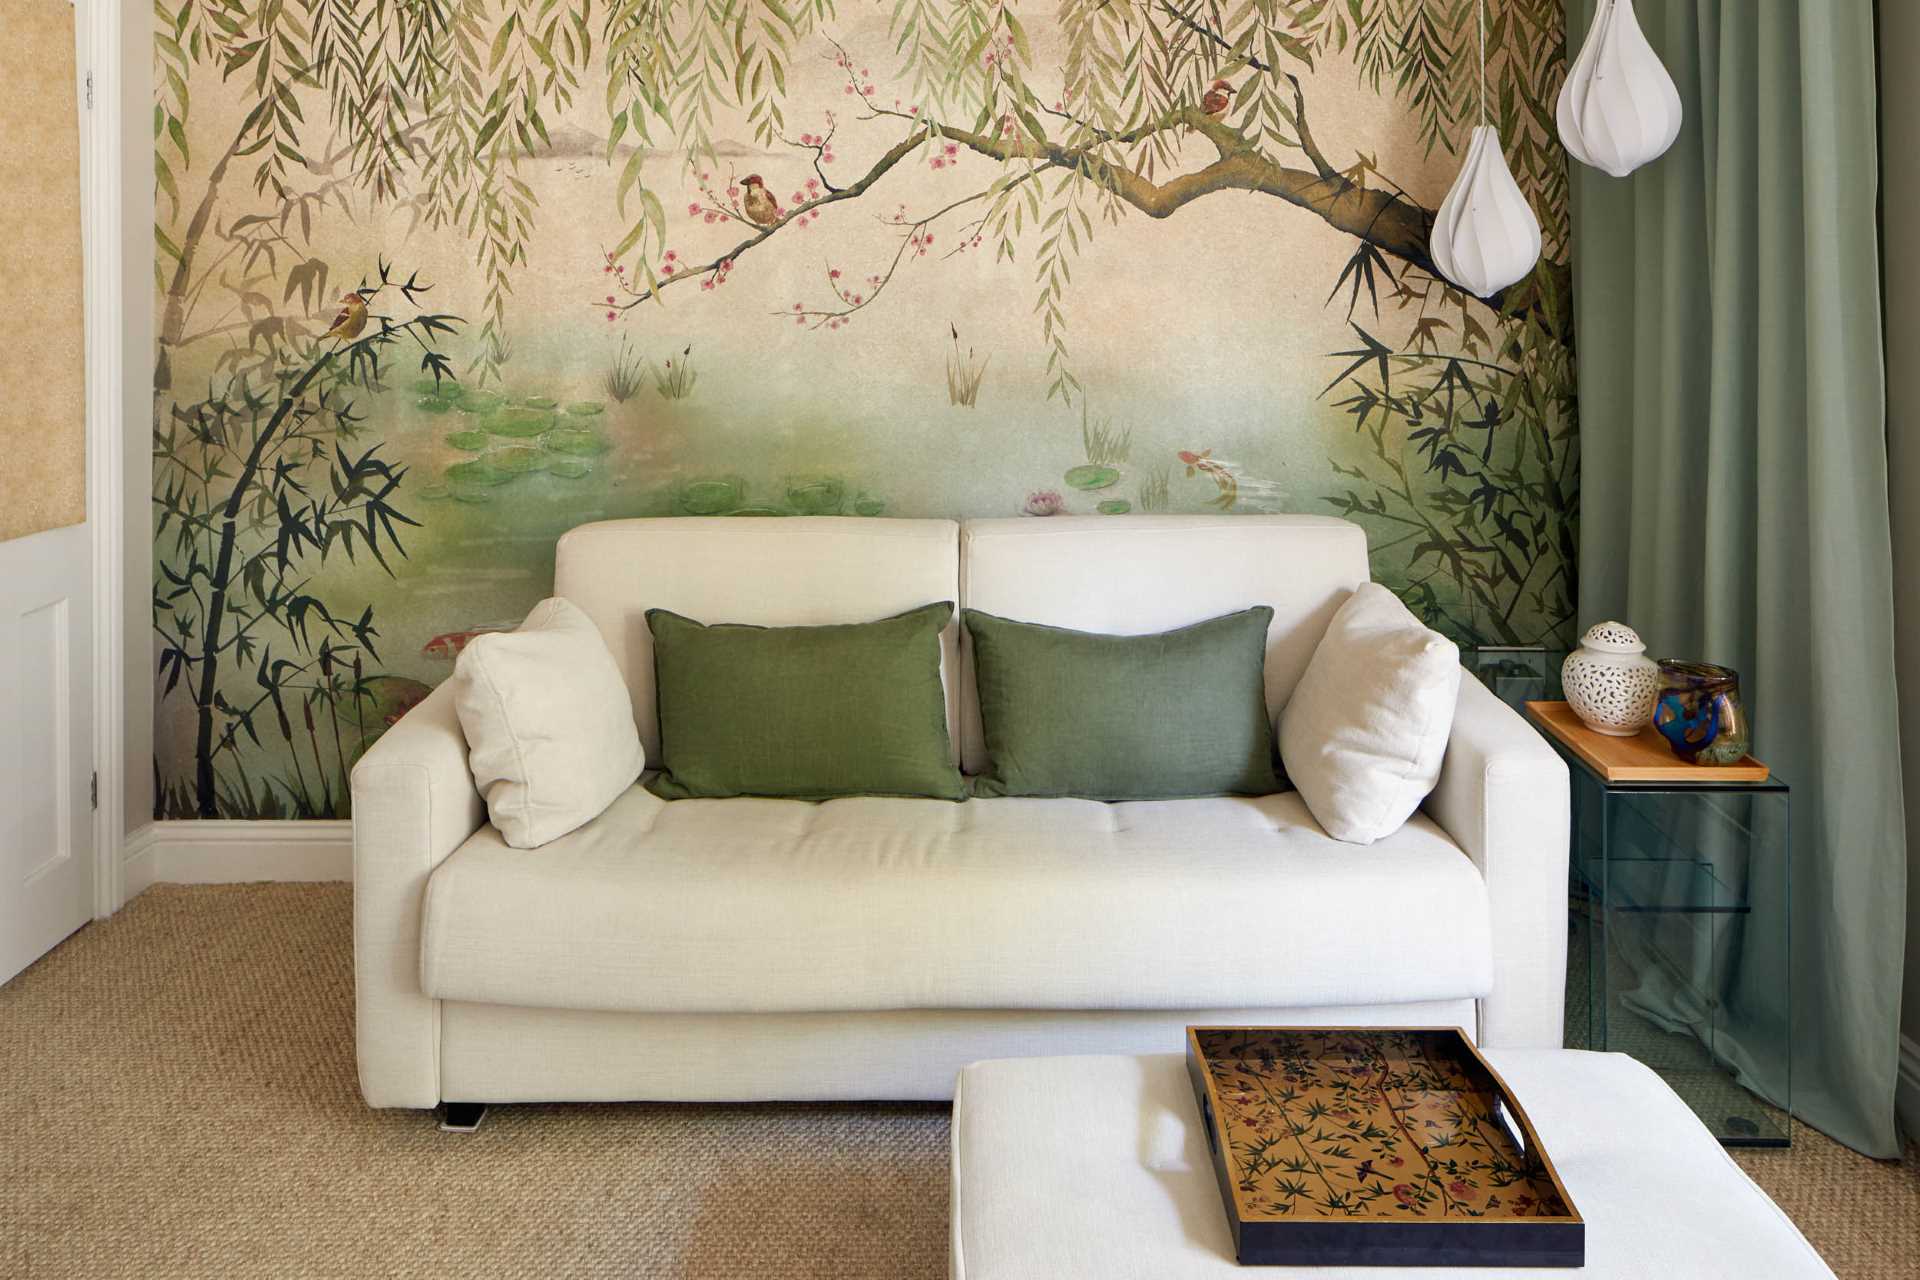 A living room that has a large nature mural that covers the wall.